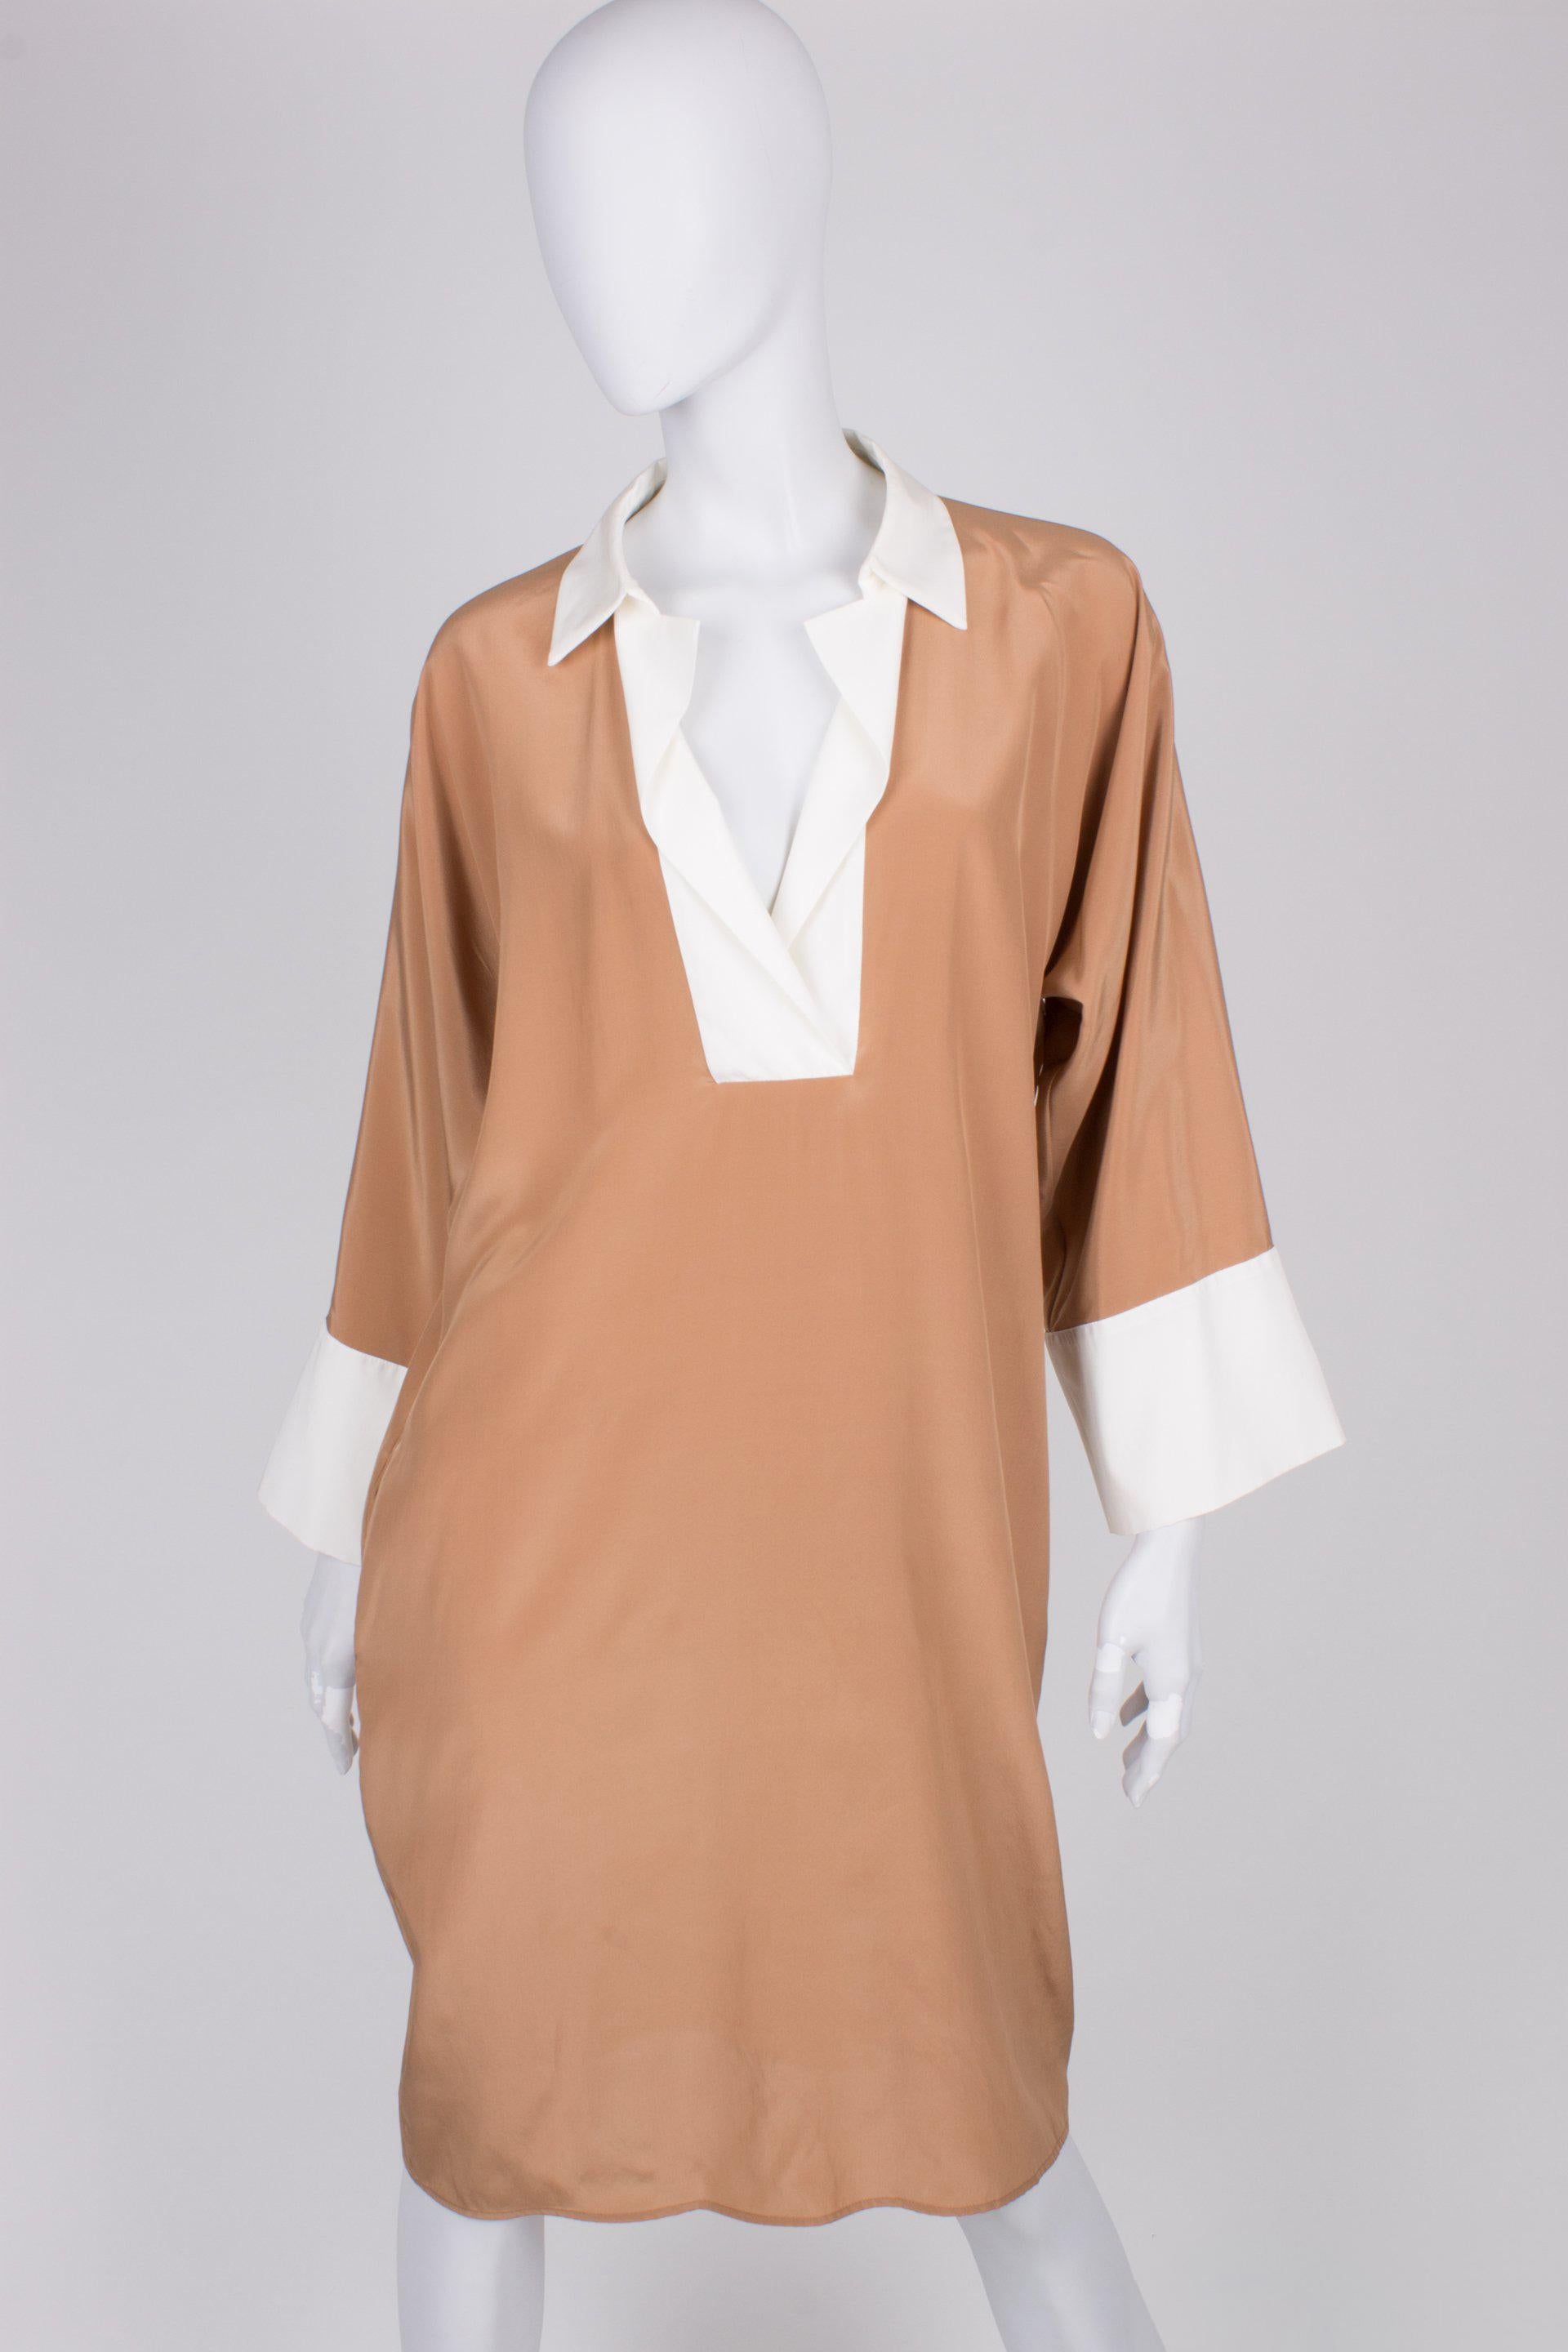 Camel colored dress by Salvatore Ferragamo with white detailing.

This supple dress with matching waistband has kneelength, a white collar and white cuffs. Welt pockets in the seam on hip heigth. No lining.

New! The tag is still on it. Original